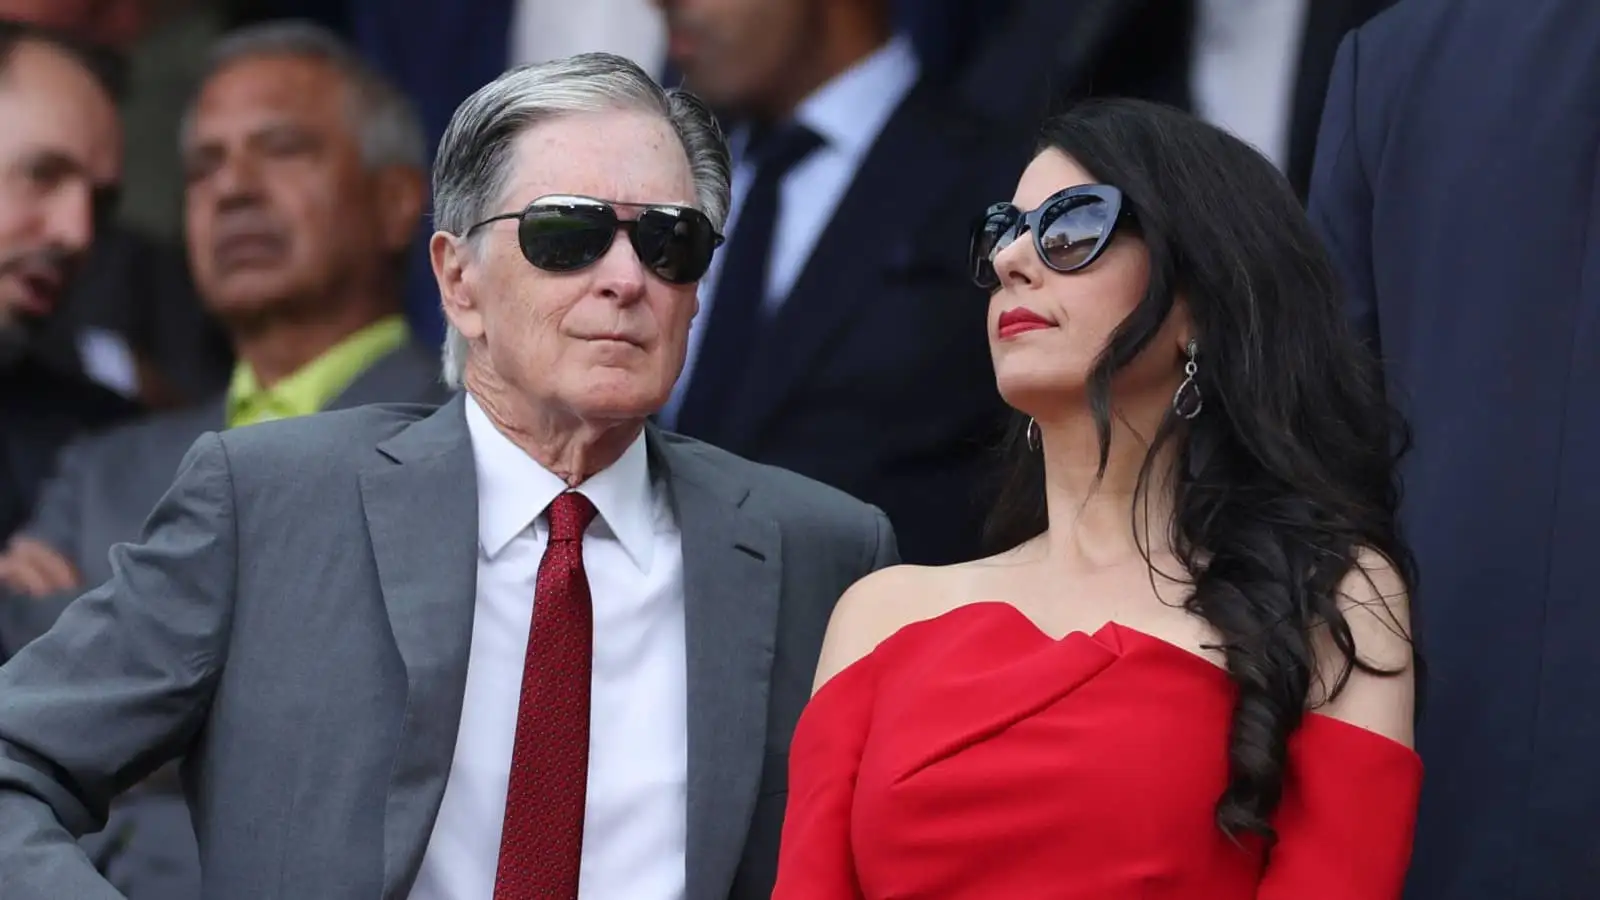 Liverpool owner John W Henry and wife Linda Pizzuti